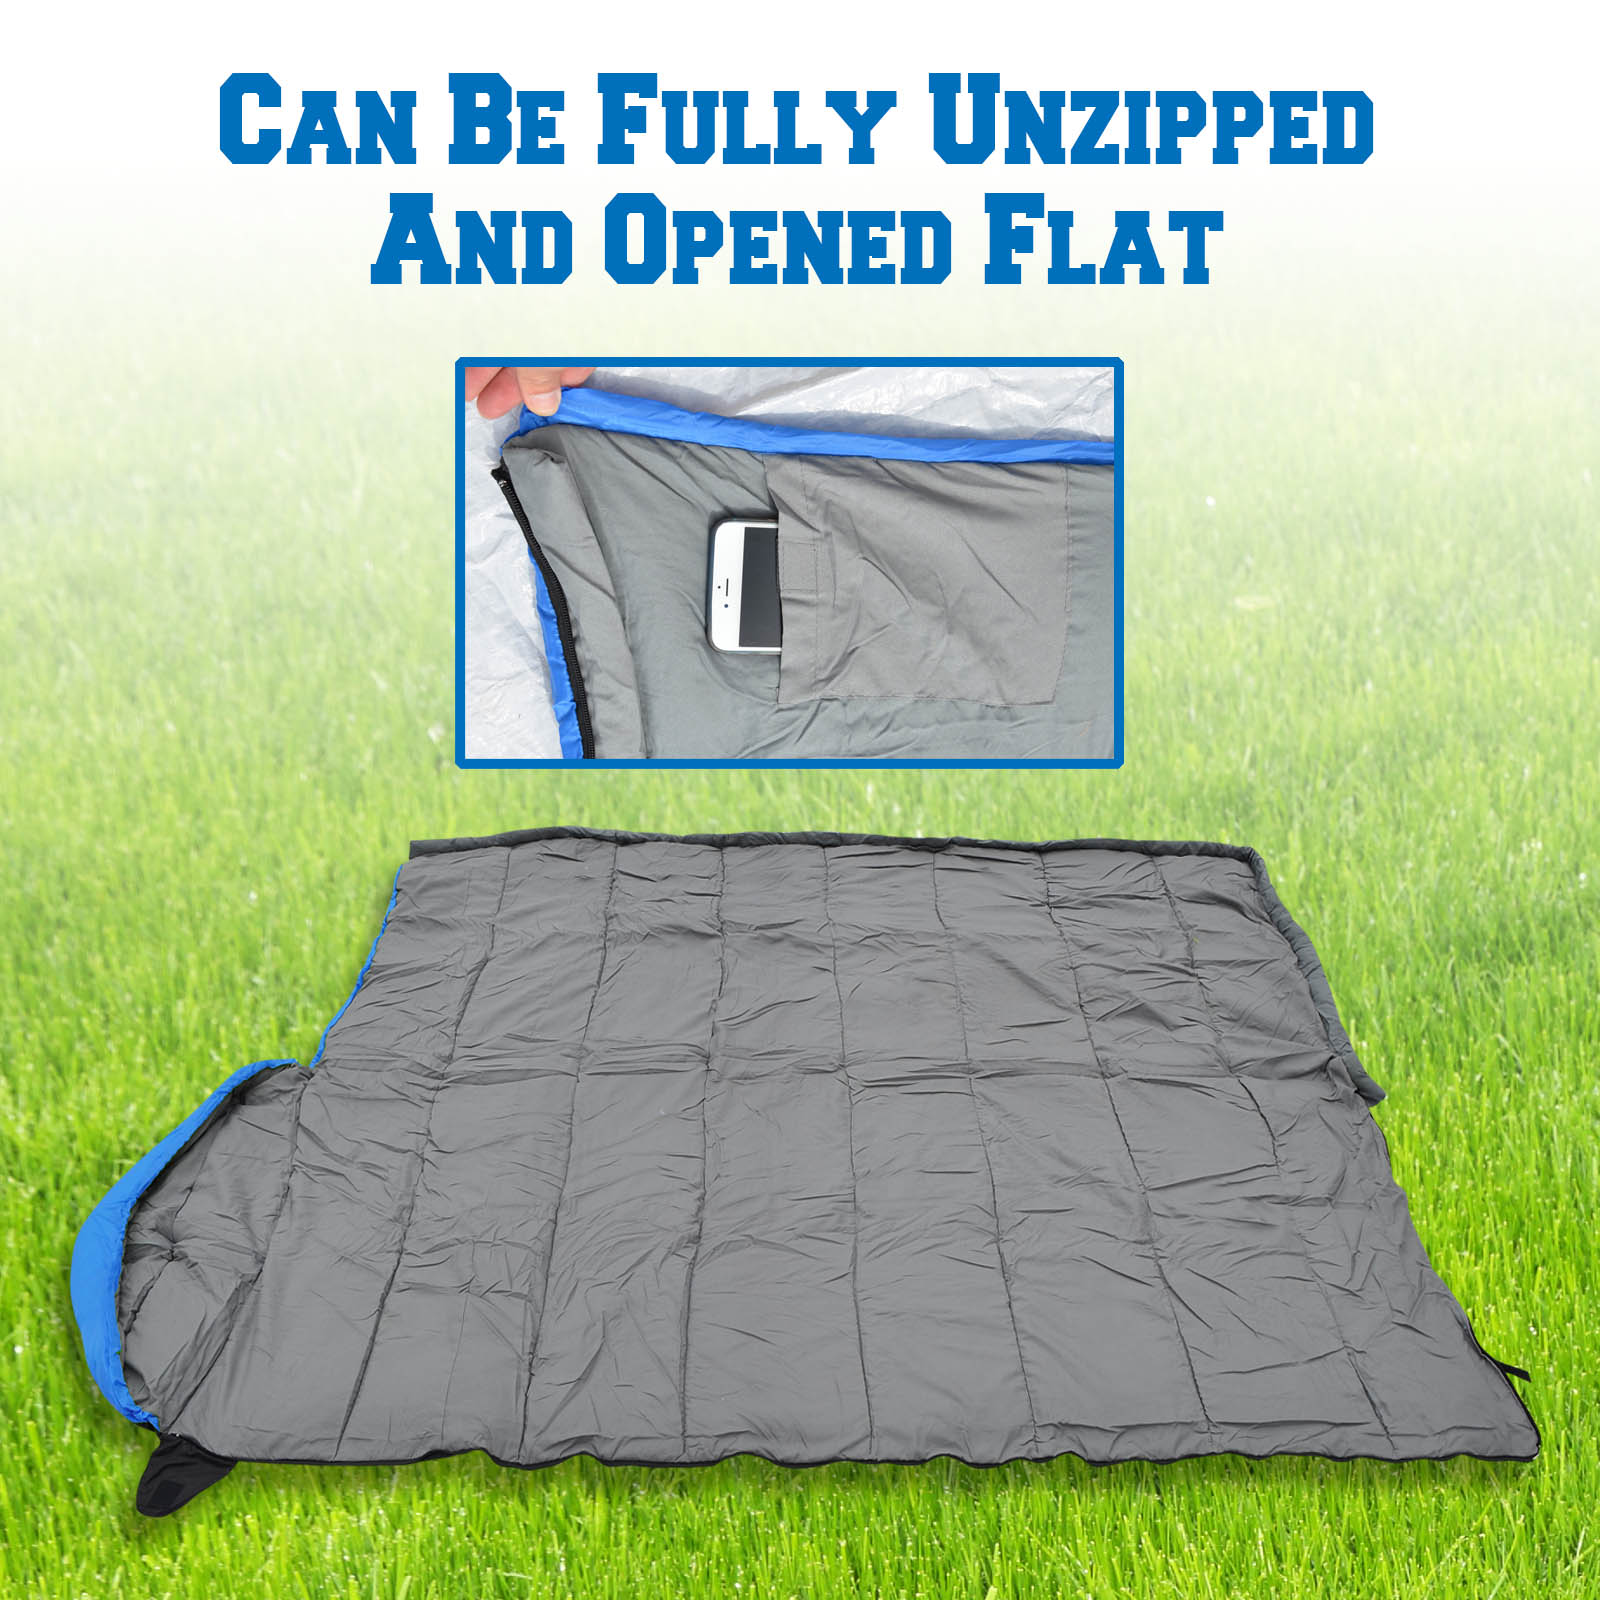 Sunrise Hooded Sleeping Bag Outdoor Camping or Indoor Sleep with Carry Bag(Blue) - image 4 of 9